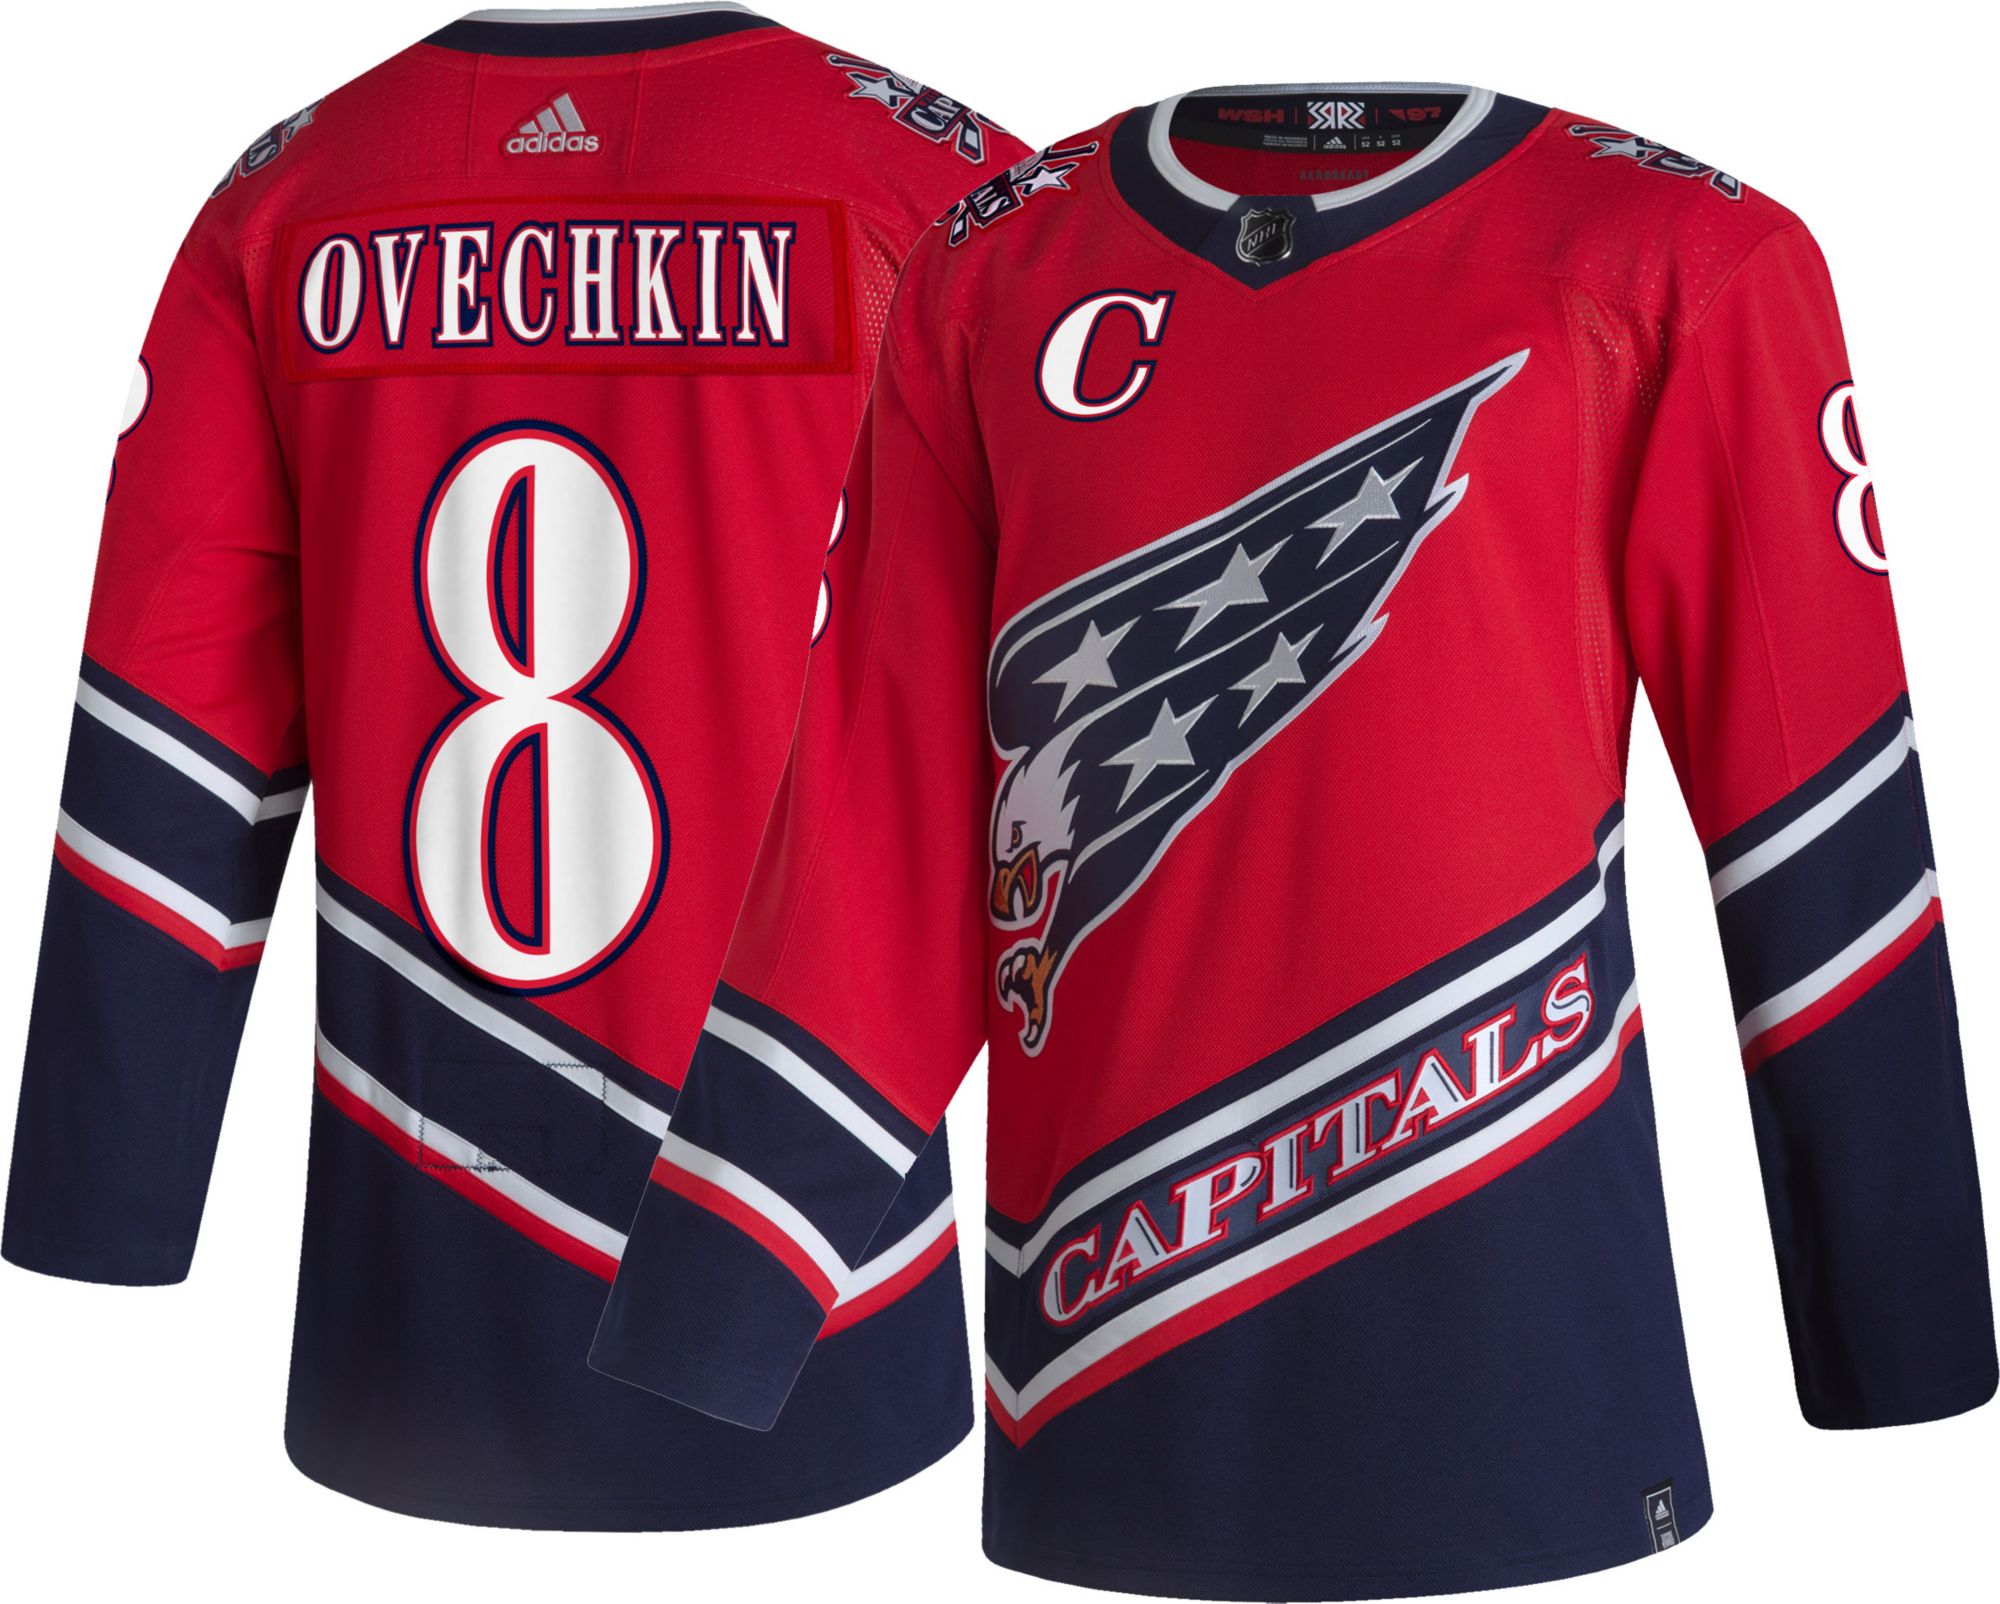 capitals screaming eagle jersey